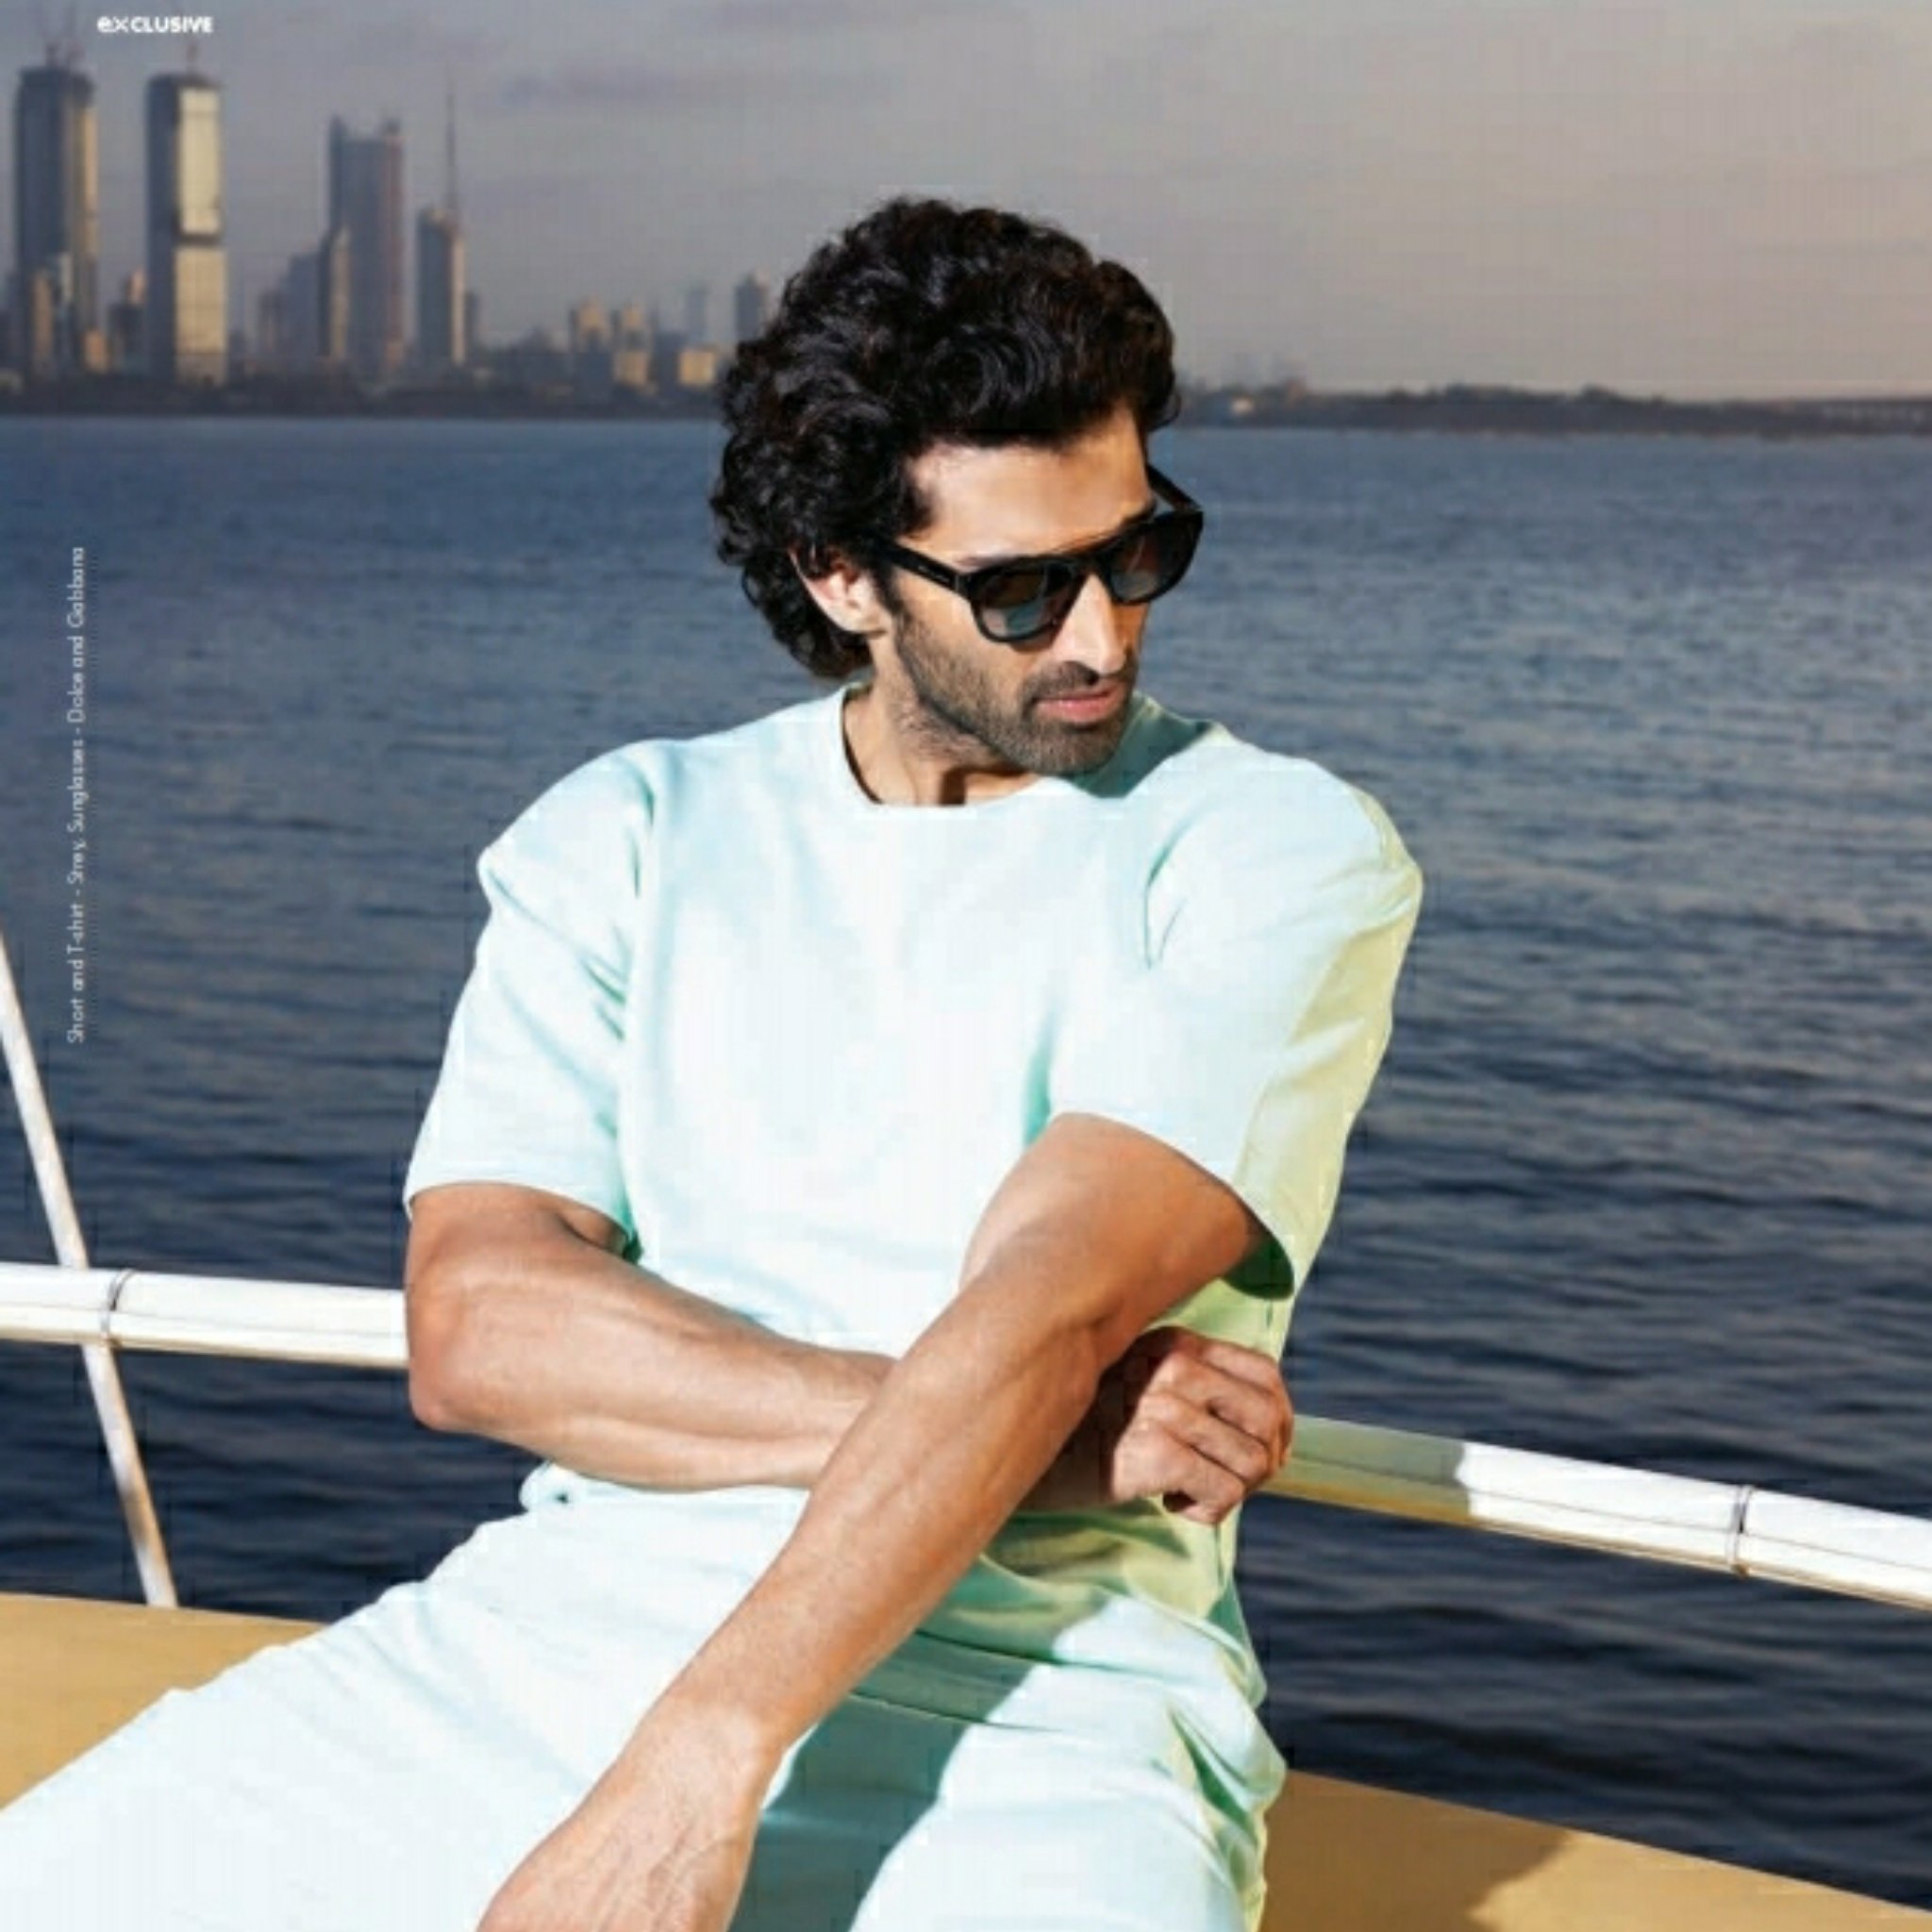 Embracing the year Aditya Roy Kapur has lined up infront of him!
Team Exhibit wishes him a very Happy Birthday 